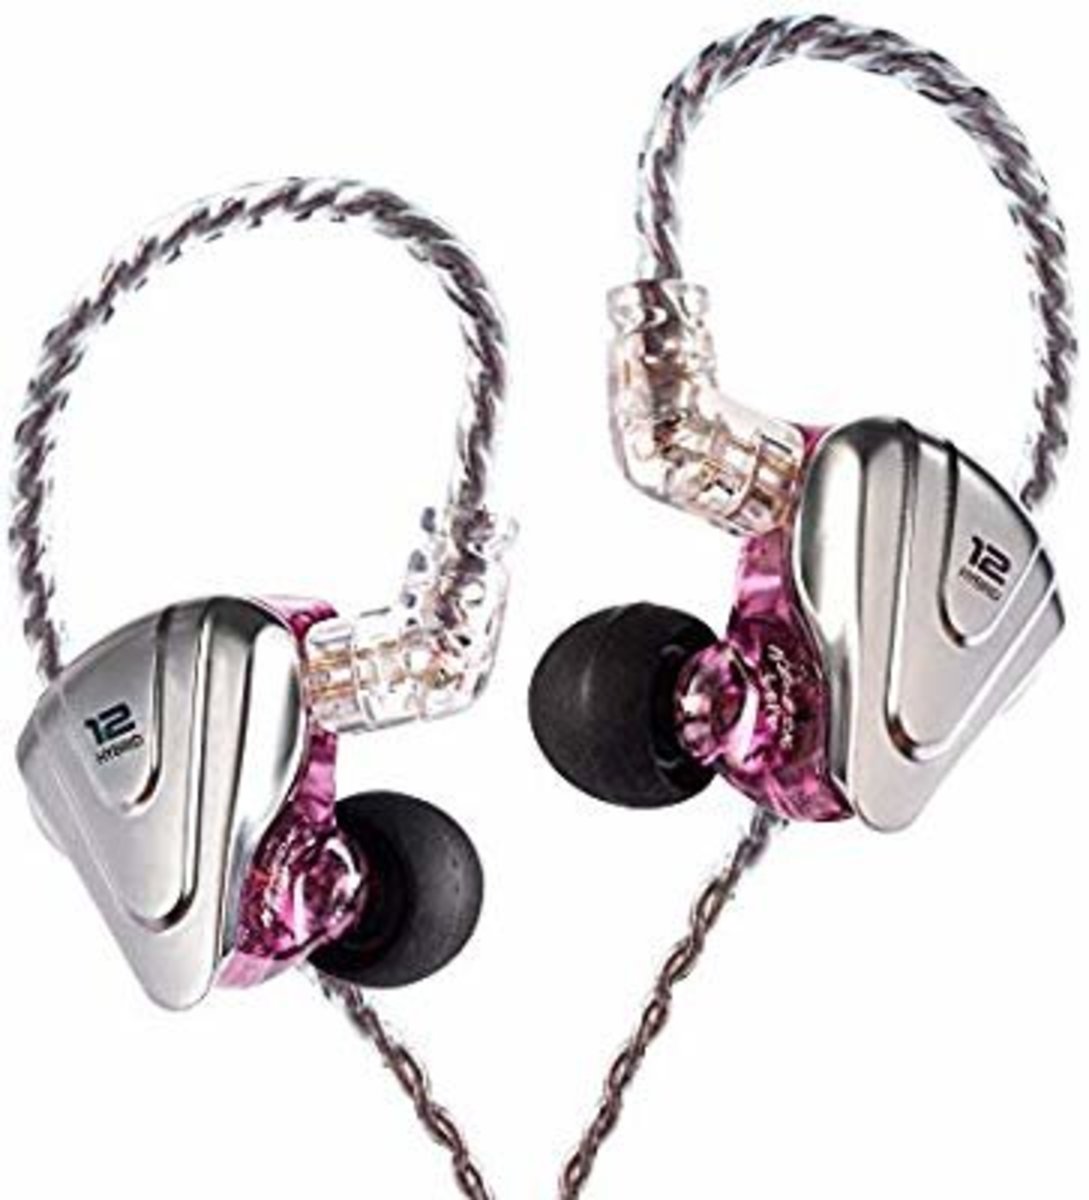 Kz Zsx In Ear Review Audiofool Reviews